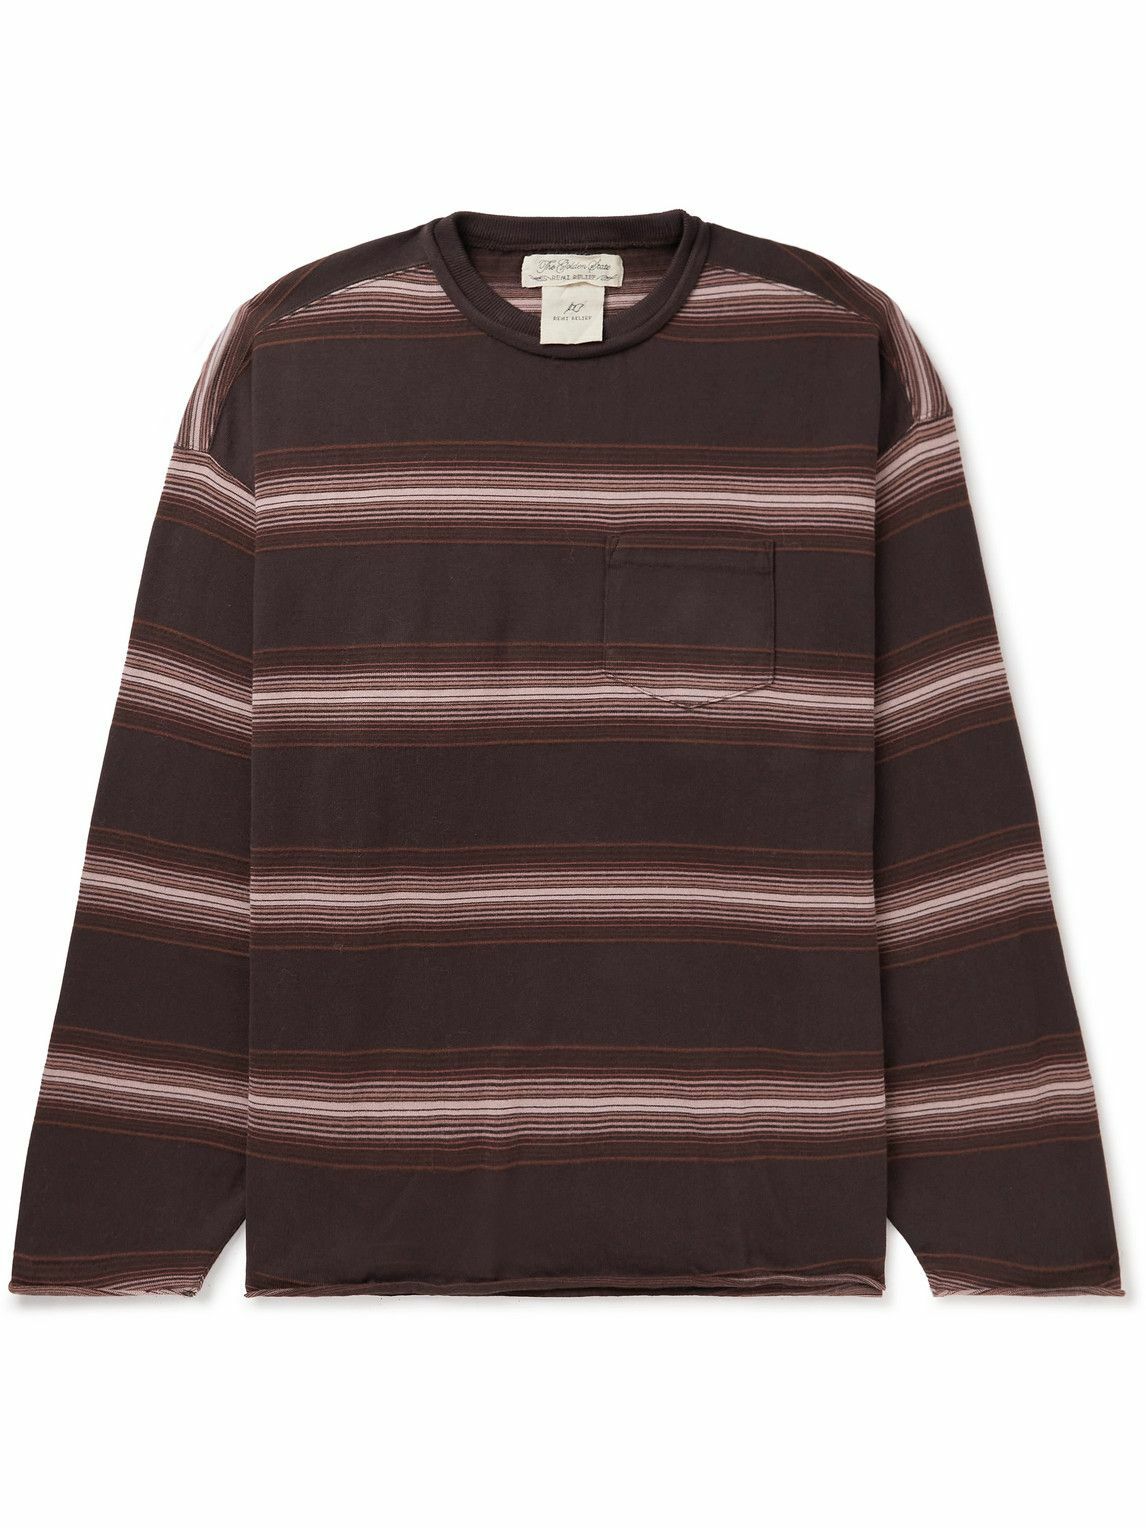 Photo: Remi Relief - Striped Cotton-Blend Jersey T-Shirt - Brown